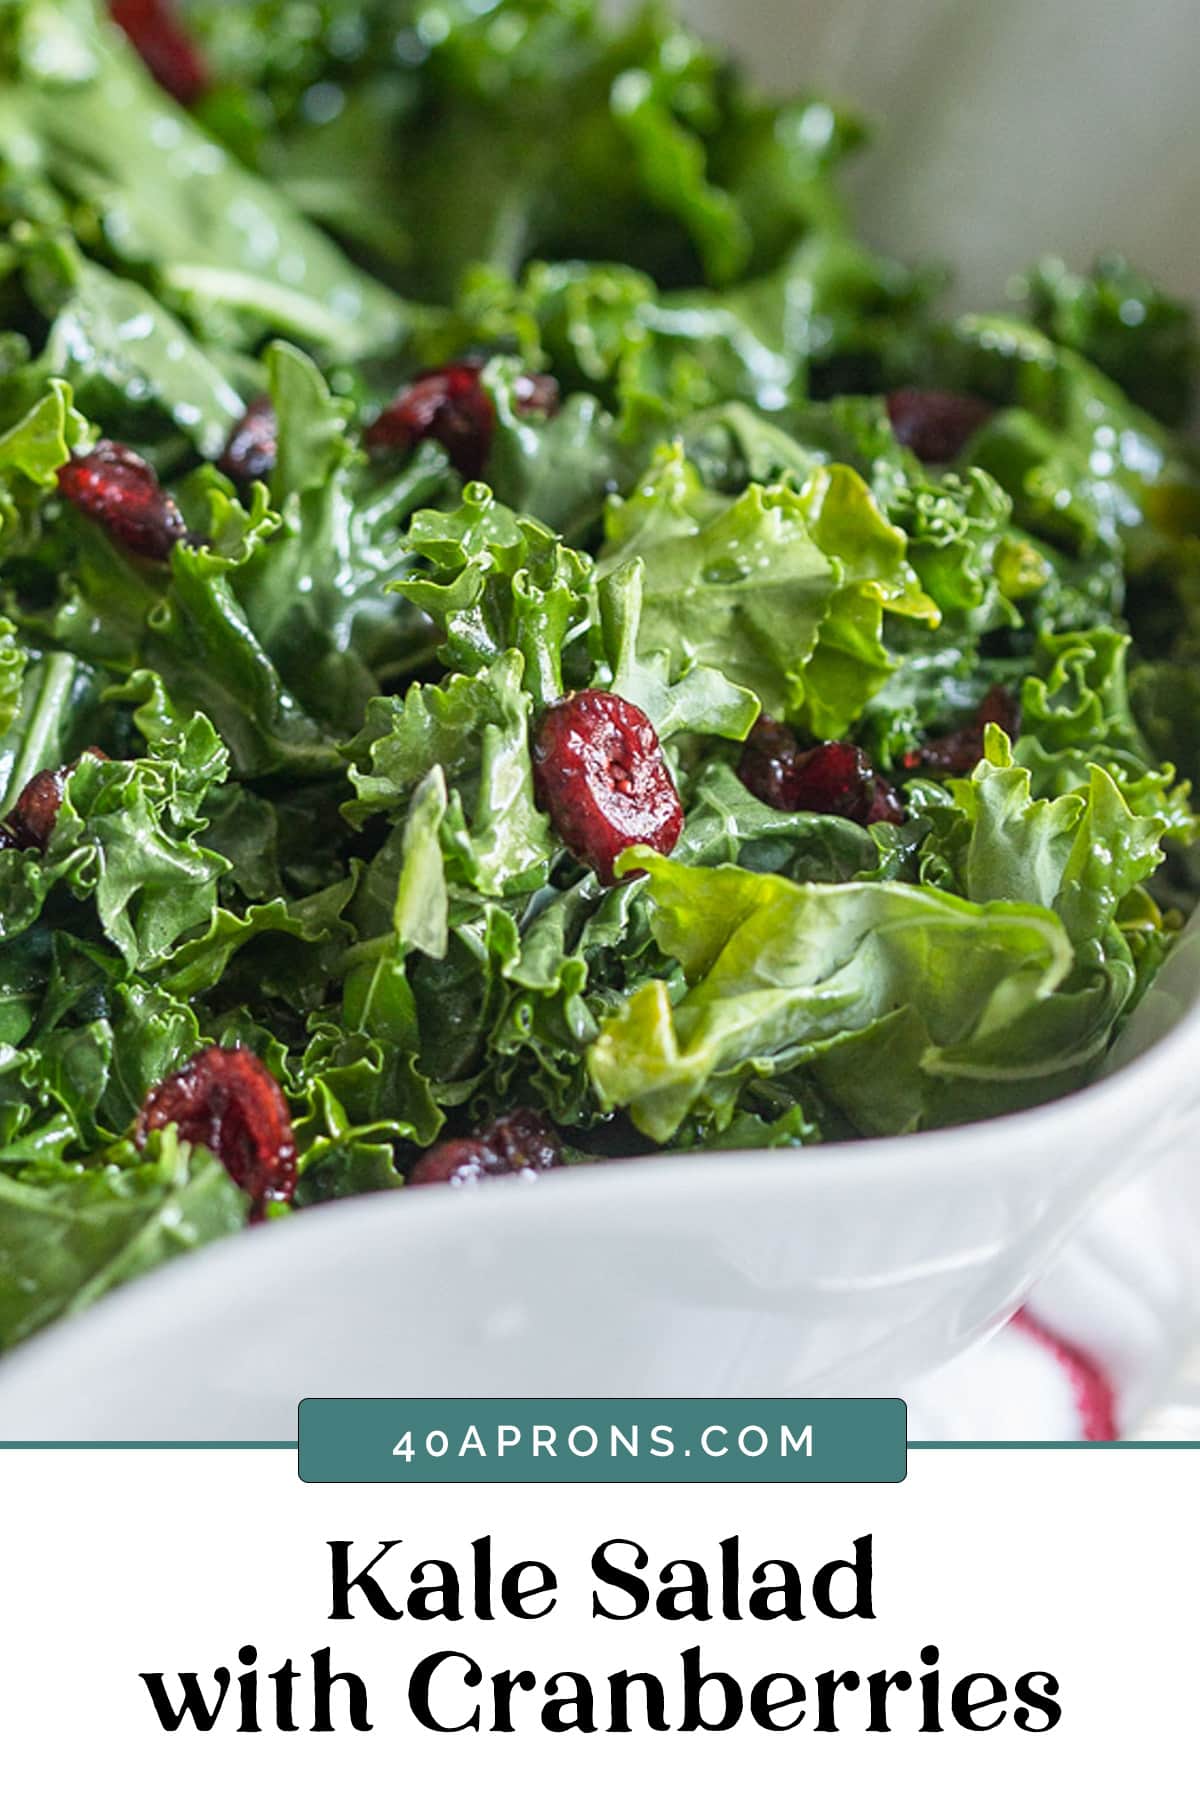 Graphic for kale salad with cranberries.